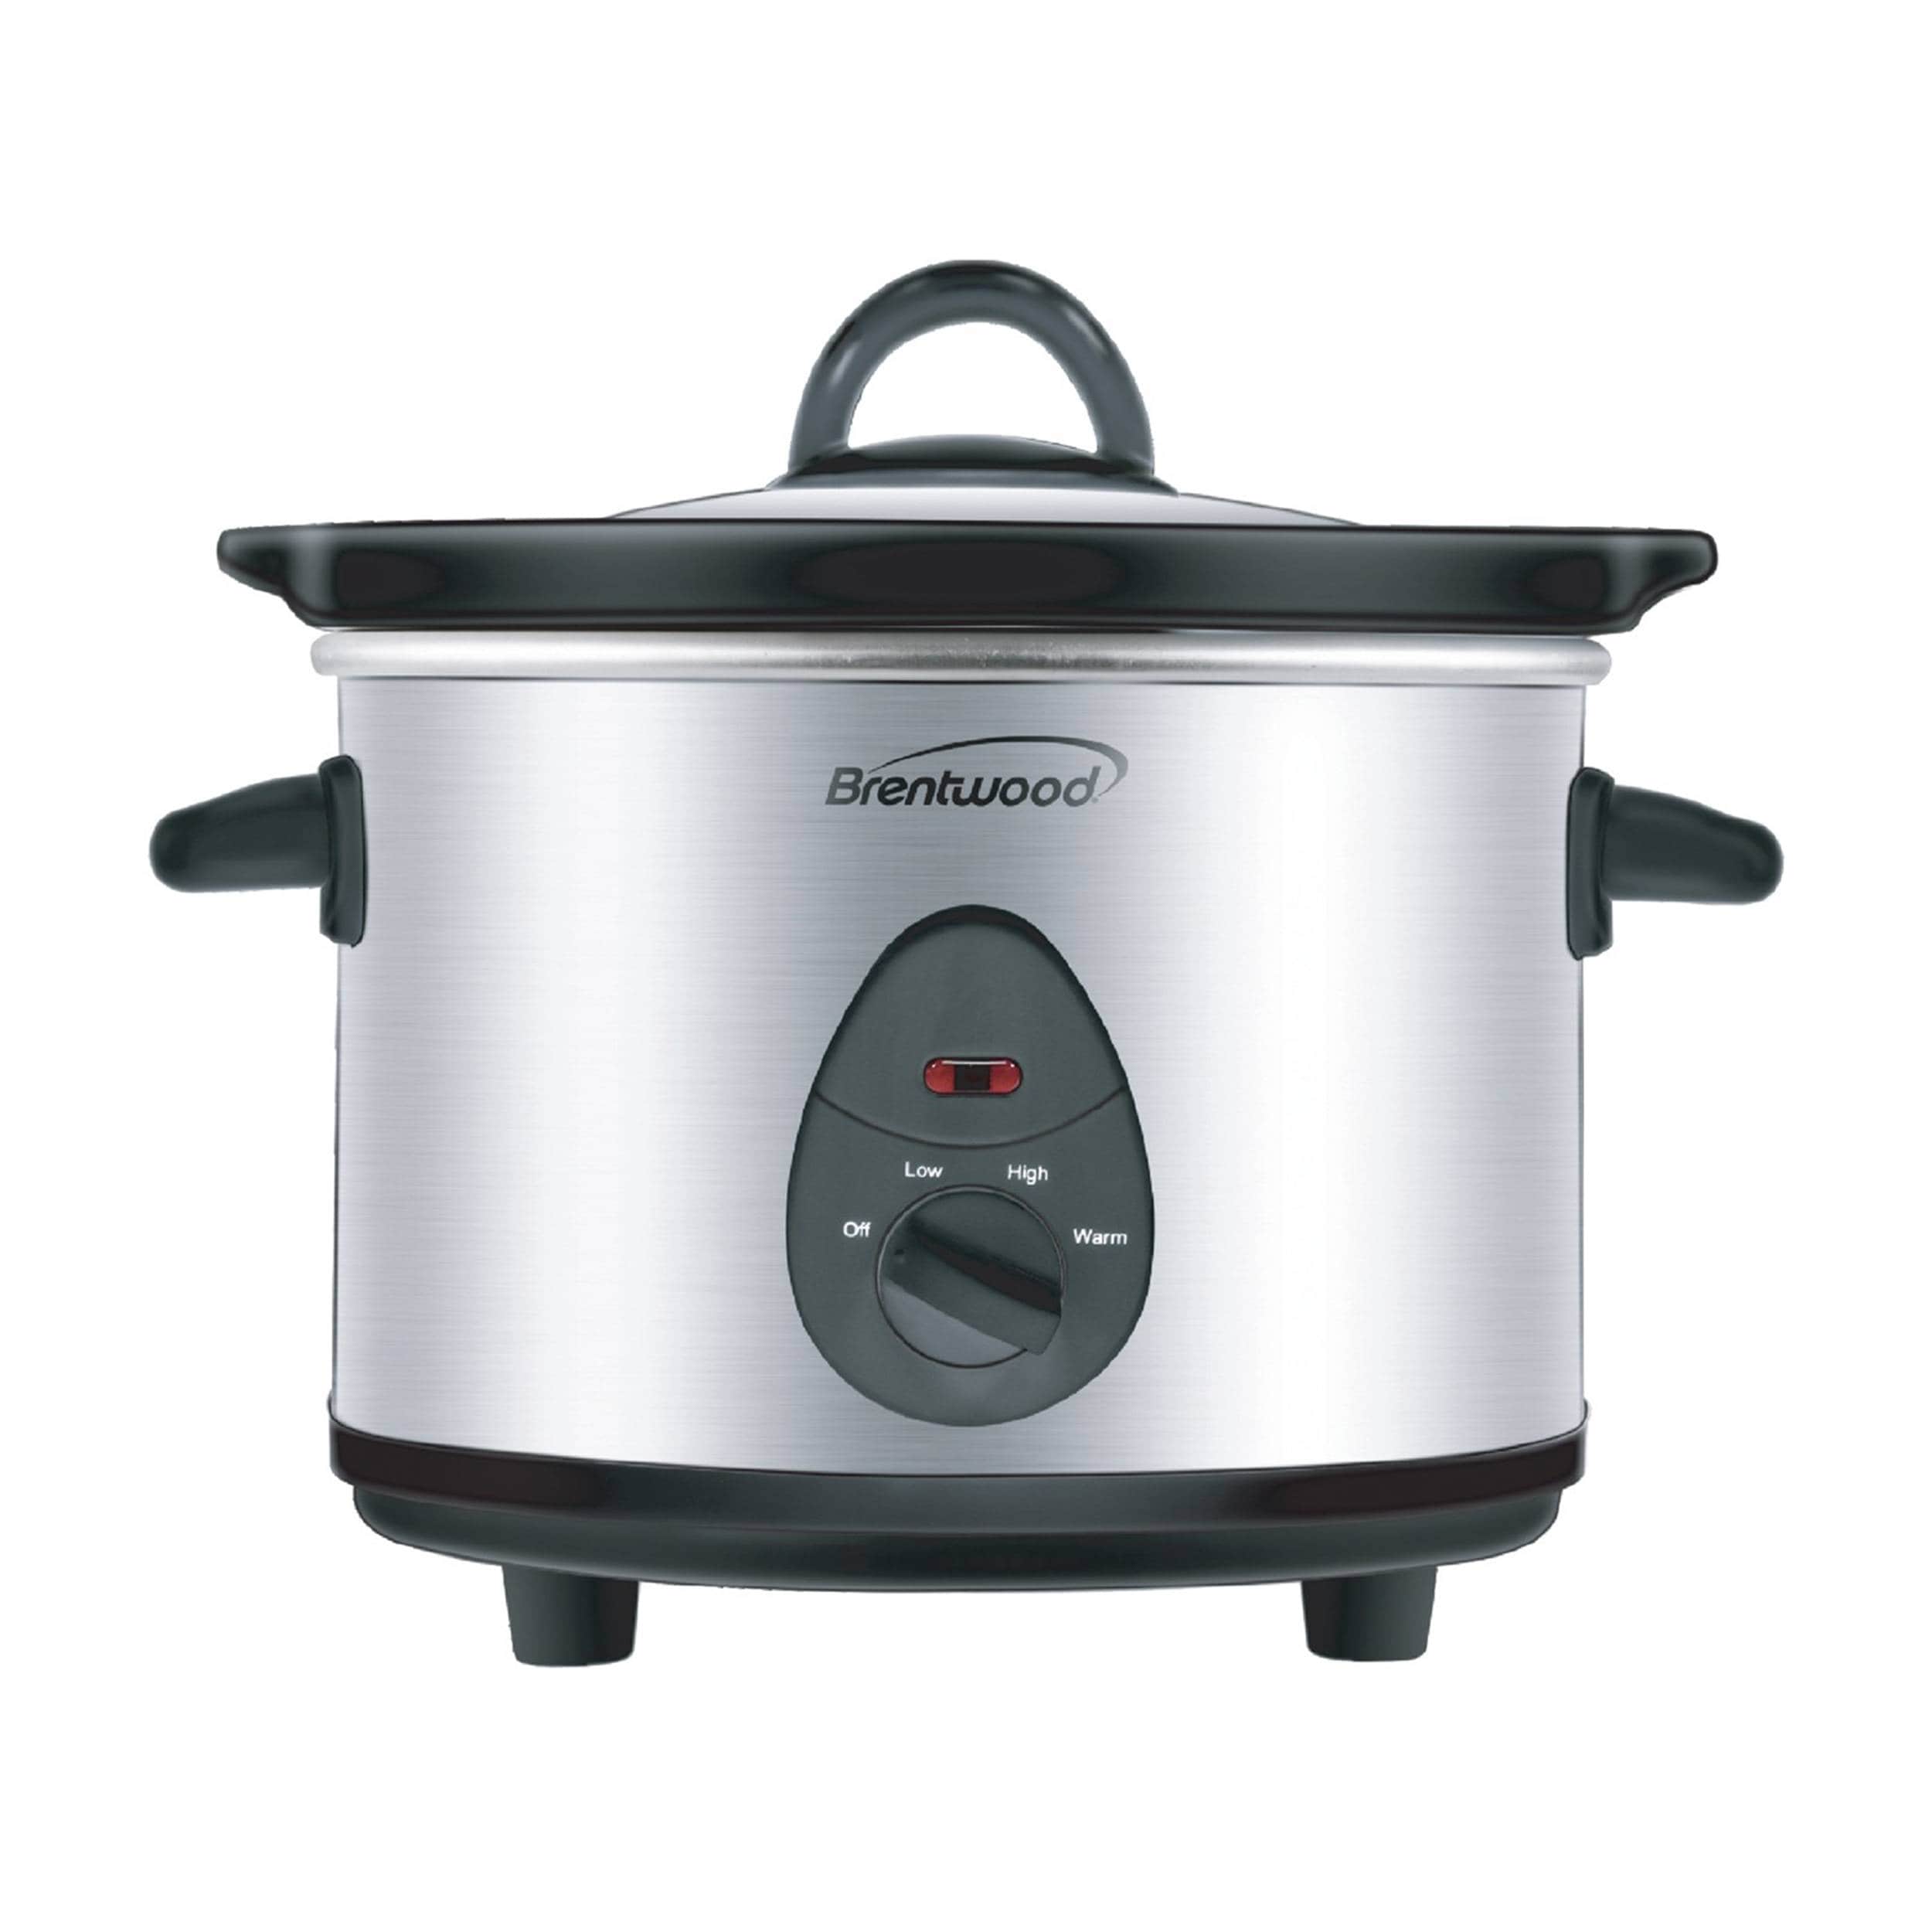 brentwood 1.5-Quart Stainless Steel Round Slow Cooker in the Slow